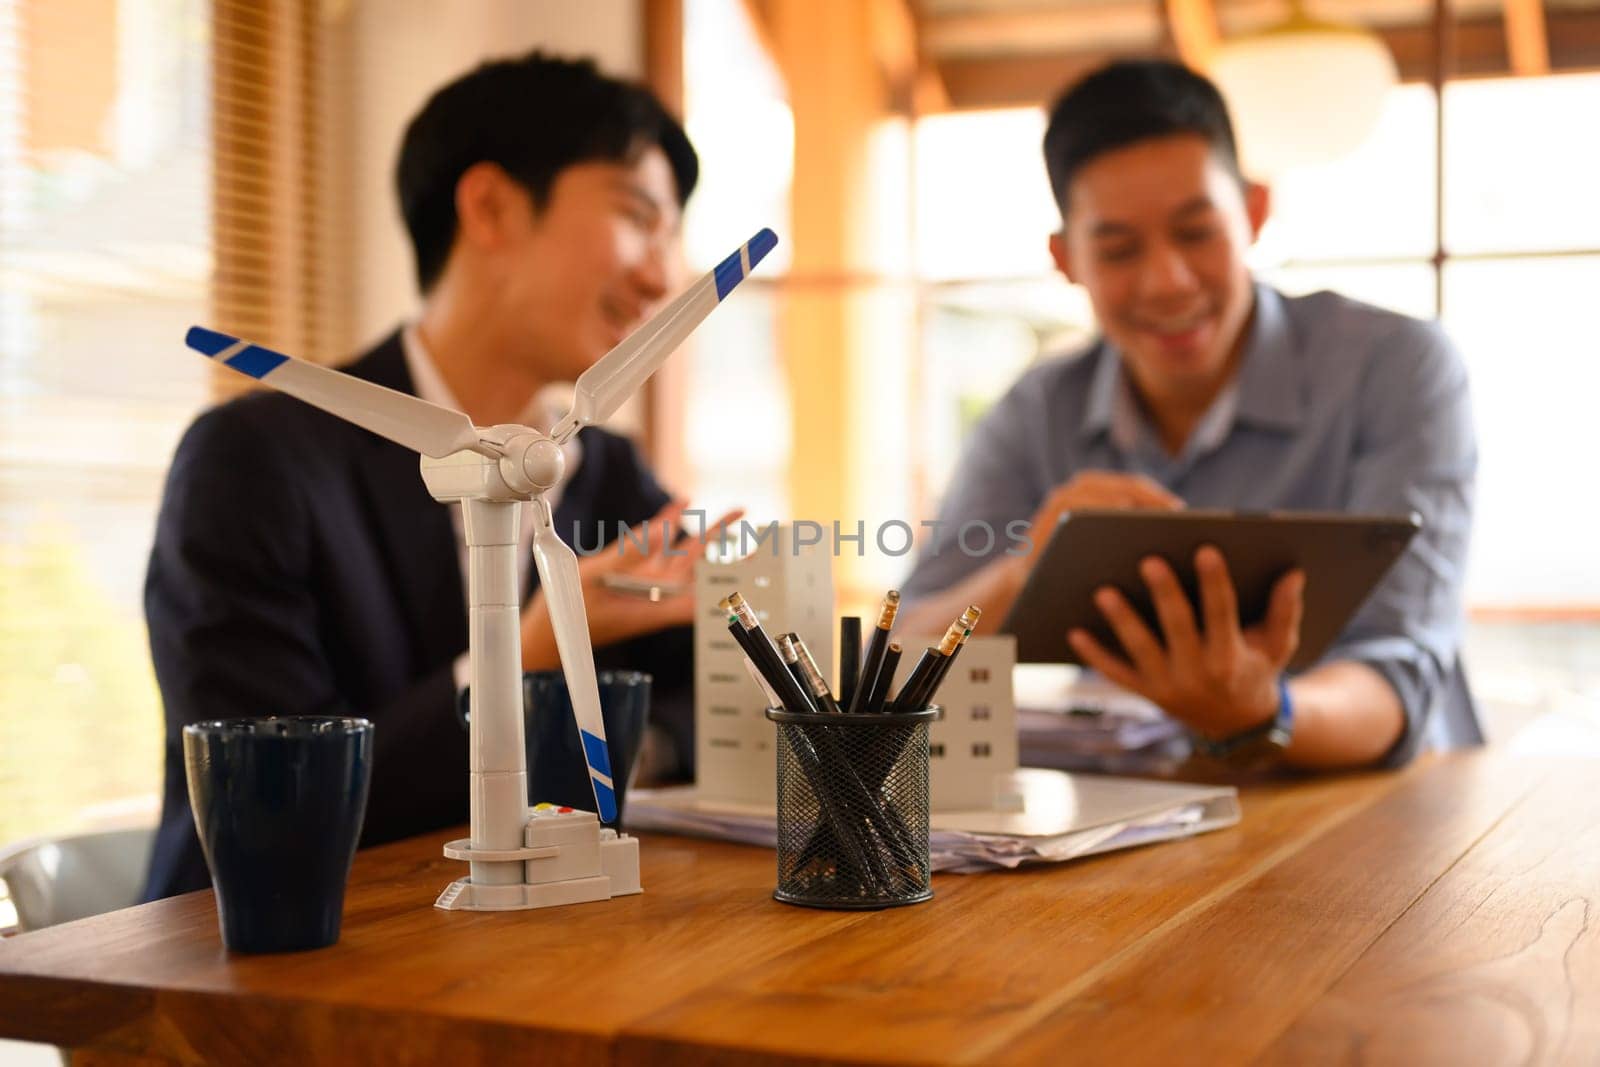 A wind turbine model on table with two businessman working in background. Alternative energy concept by prathanchorruangsak